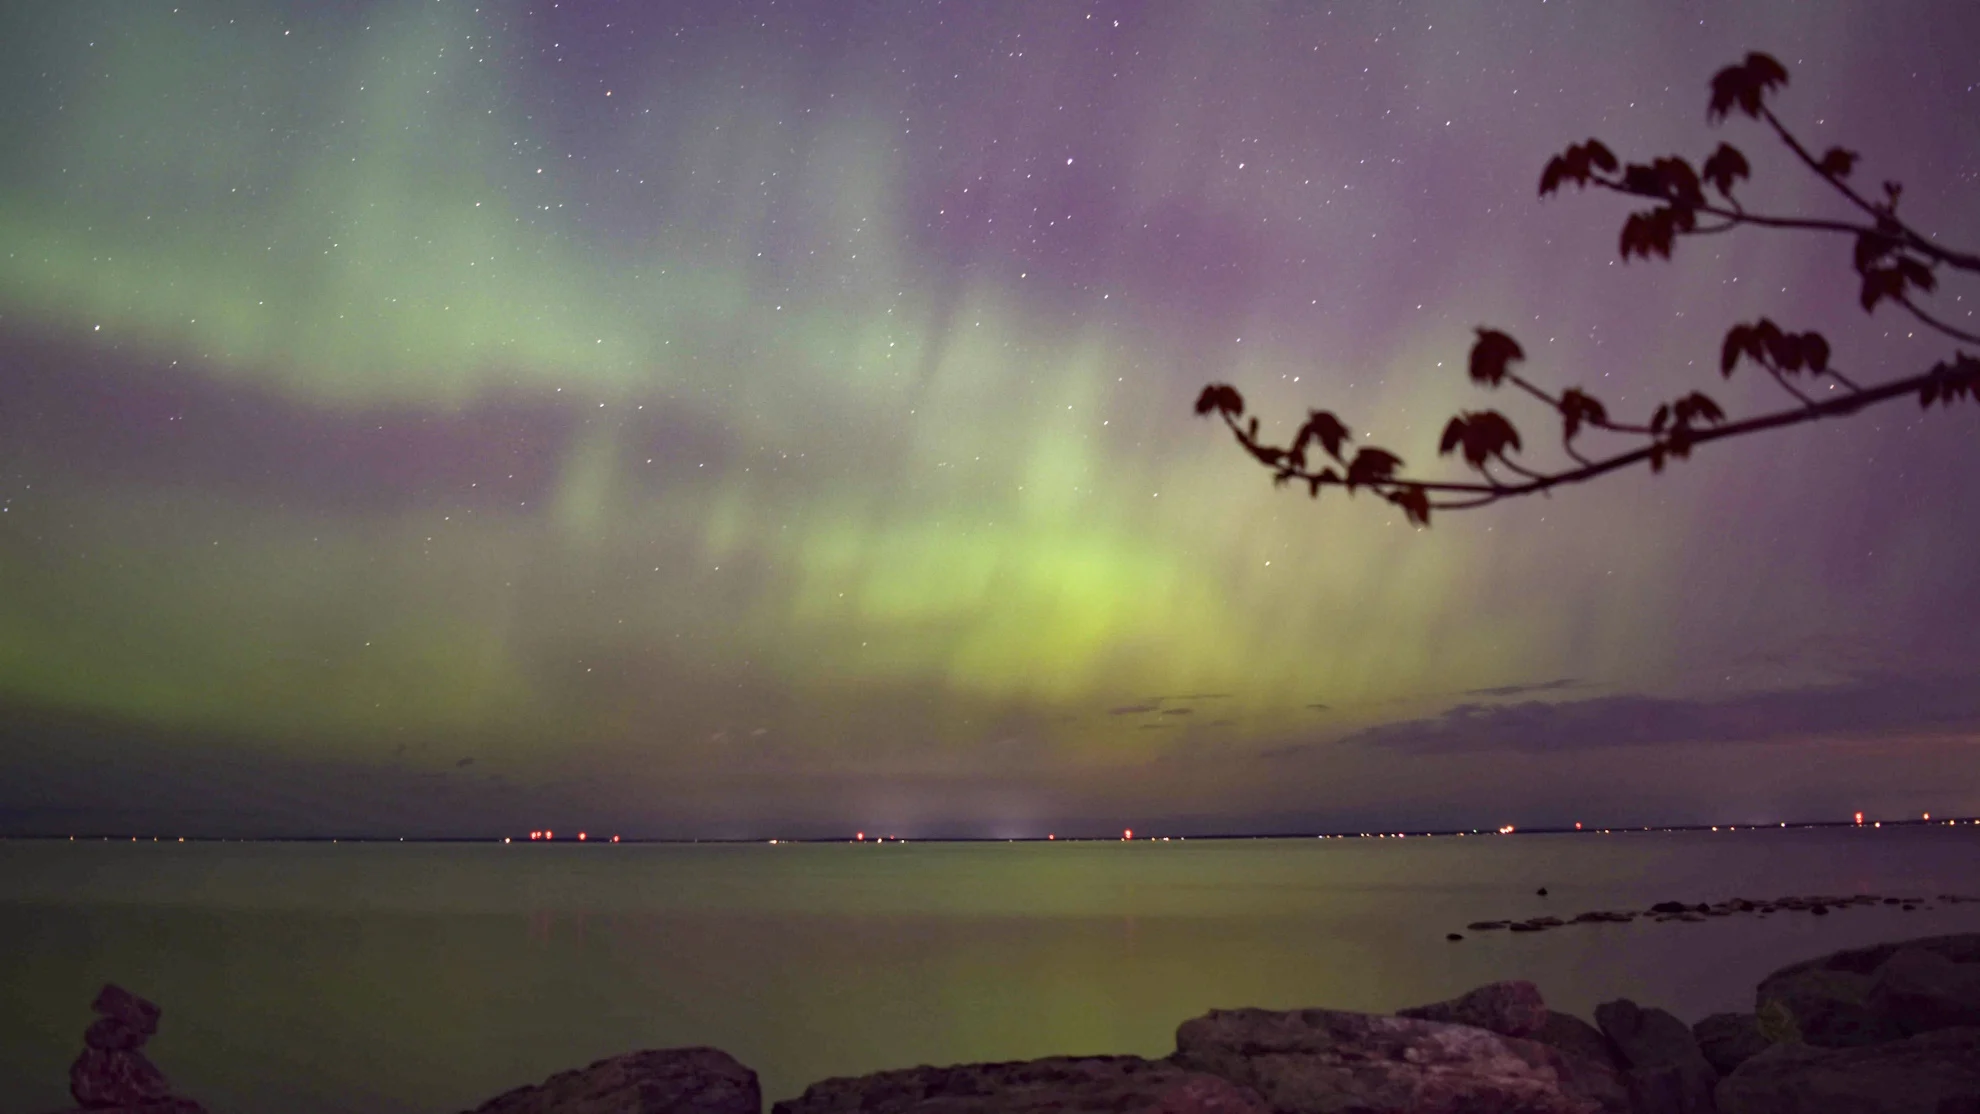 Parts of Quebec could see widespread auroras again Saturday night as an intense solar storm continues this weekend